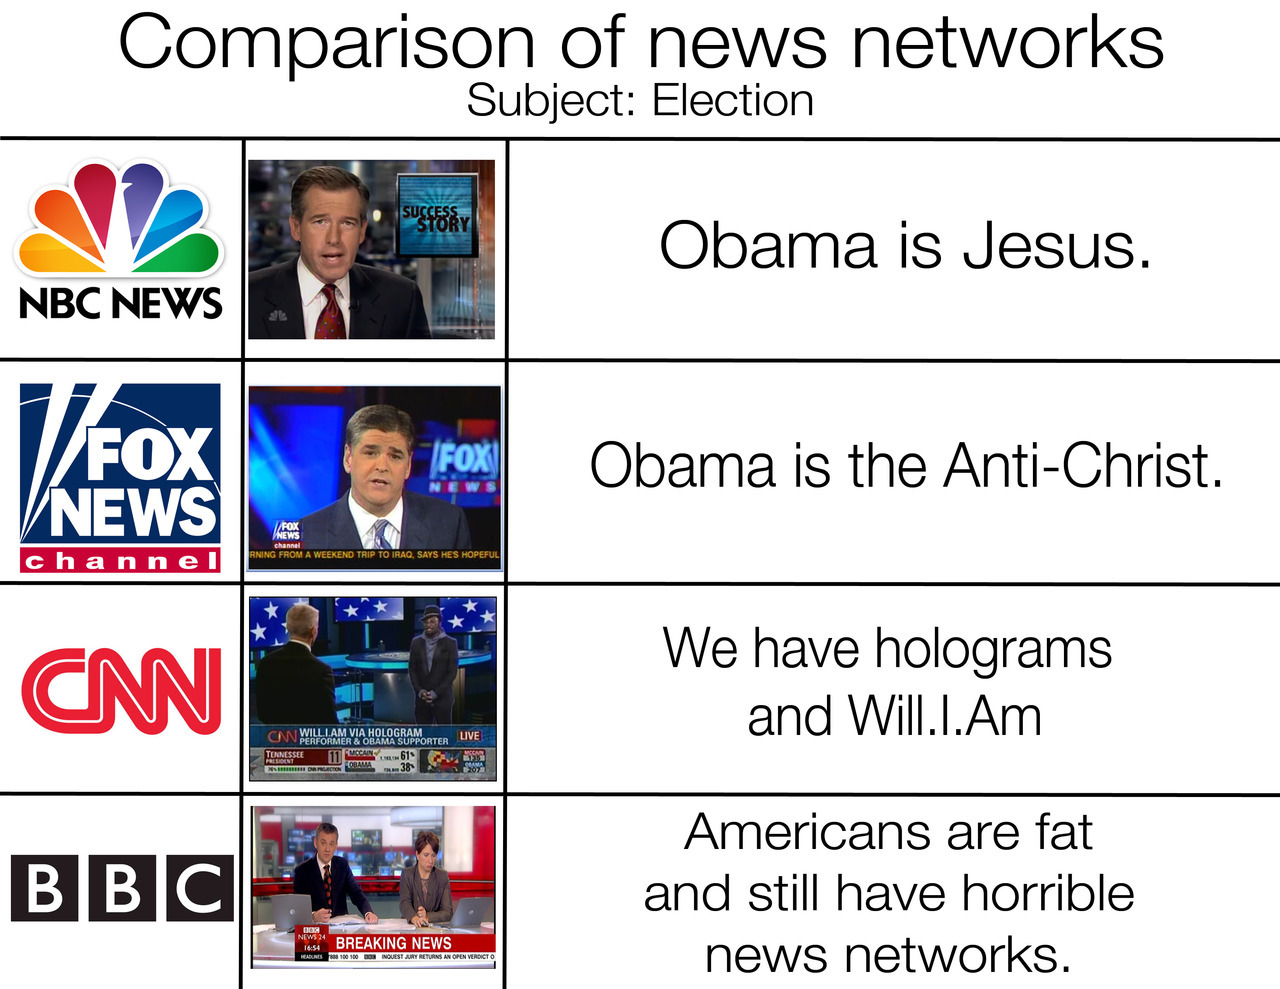 Comparison of the election coverage on various news networks.